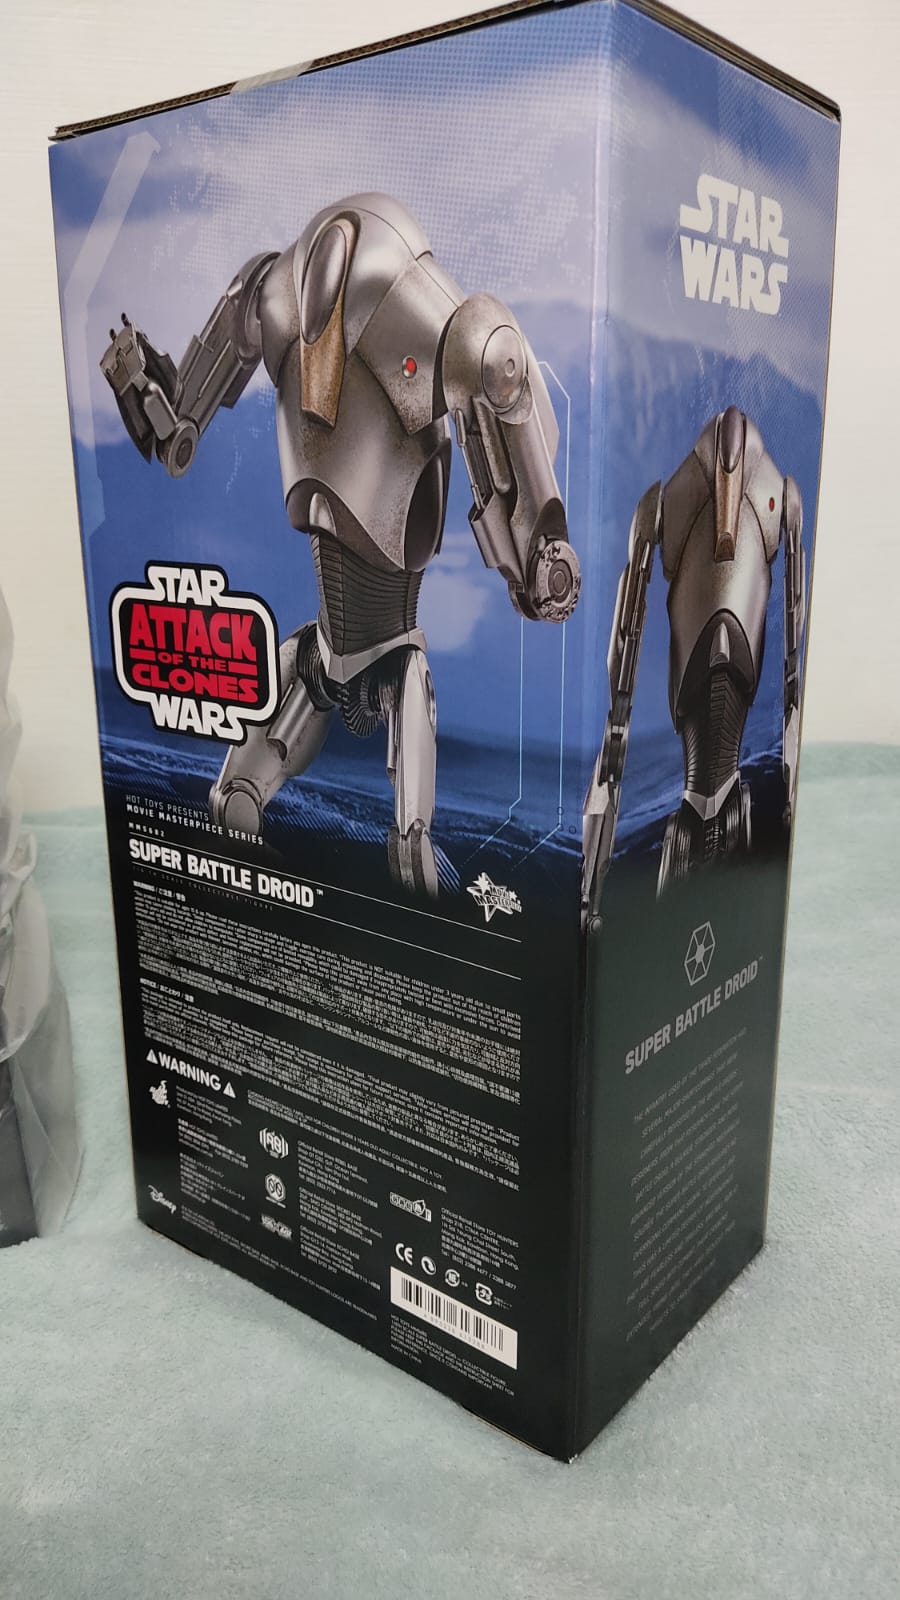 SuperBattleDroid - NEW PRODUCT: HOT TOYS: STAR WARS EPISODE II: ATTACK OF THE CLONES™ SUPER BATTLE DROID™ 1/6TH SCALE COLLECTIBLE FIGURE Whats161